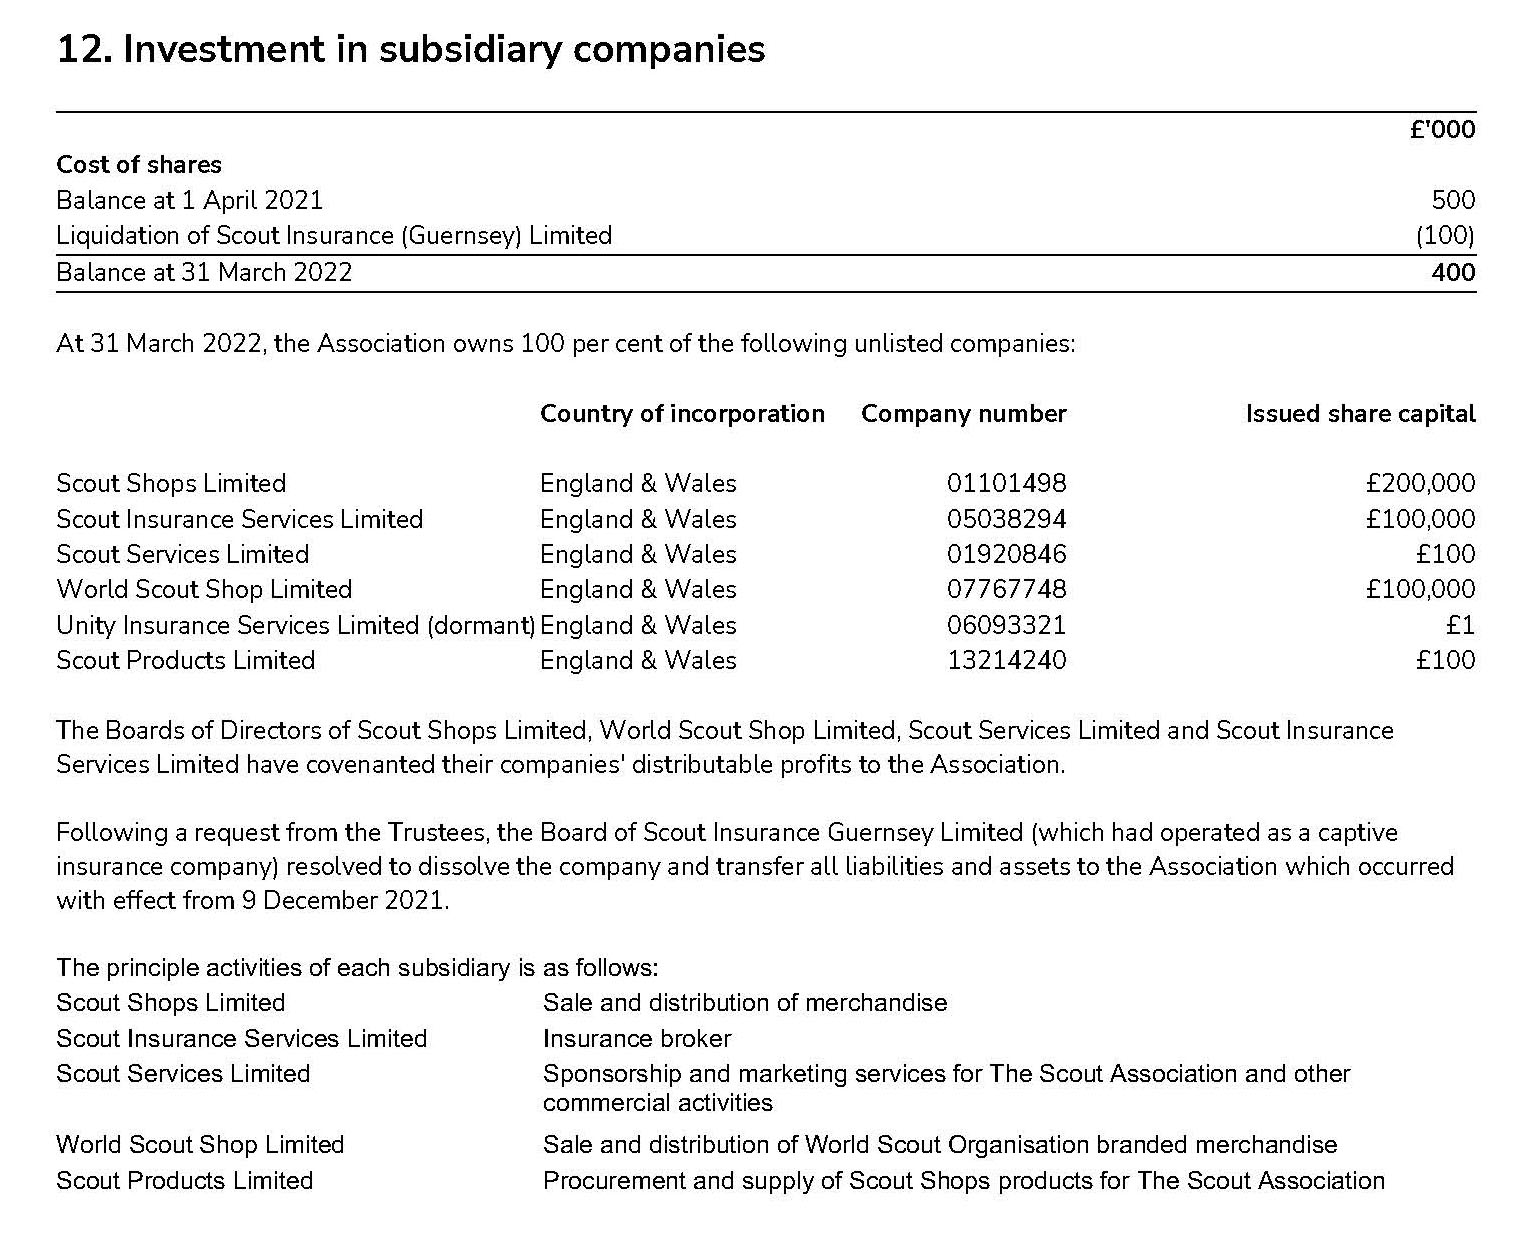 Table showing Scouts investment in subsidiary companies in 2021-22